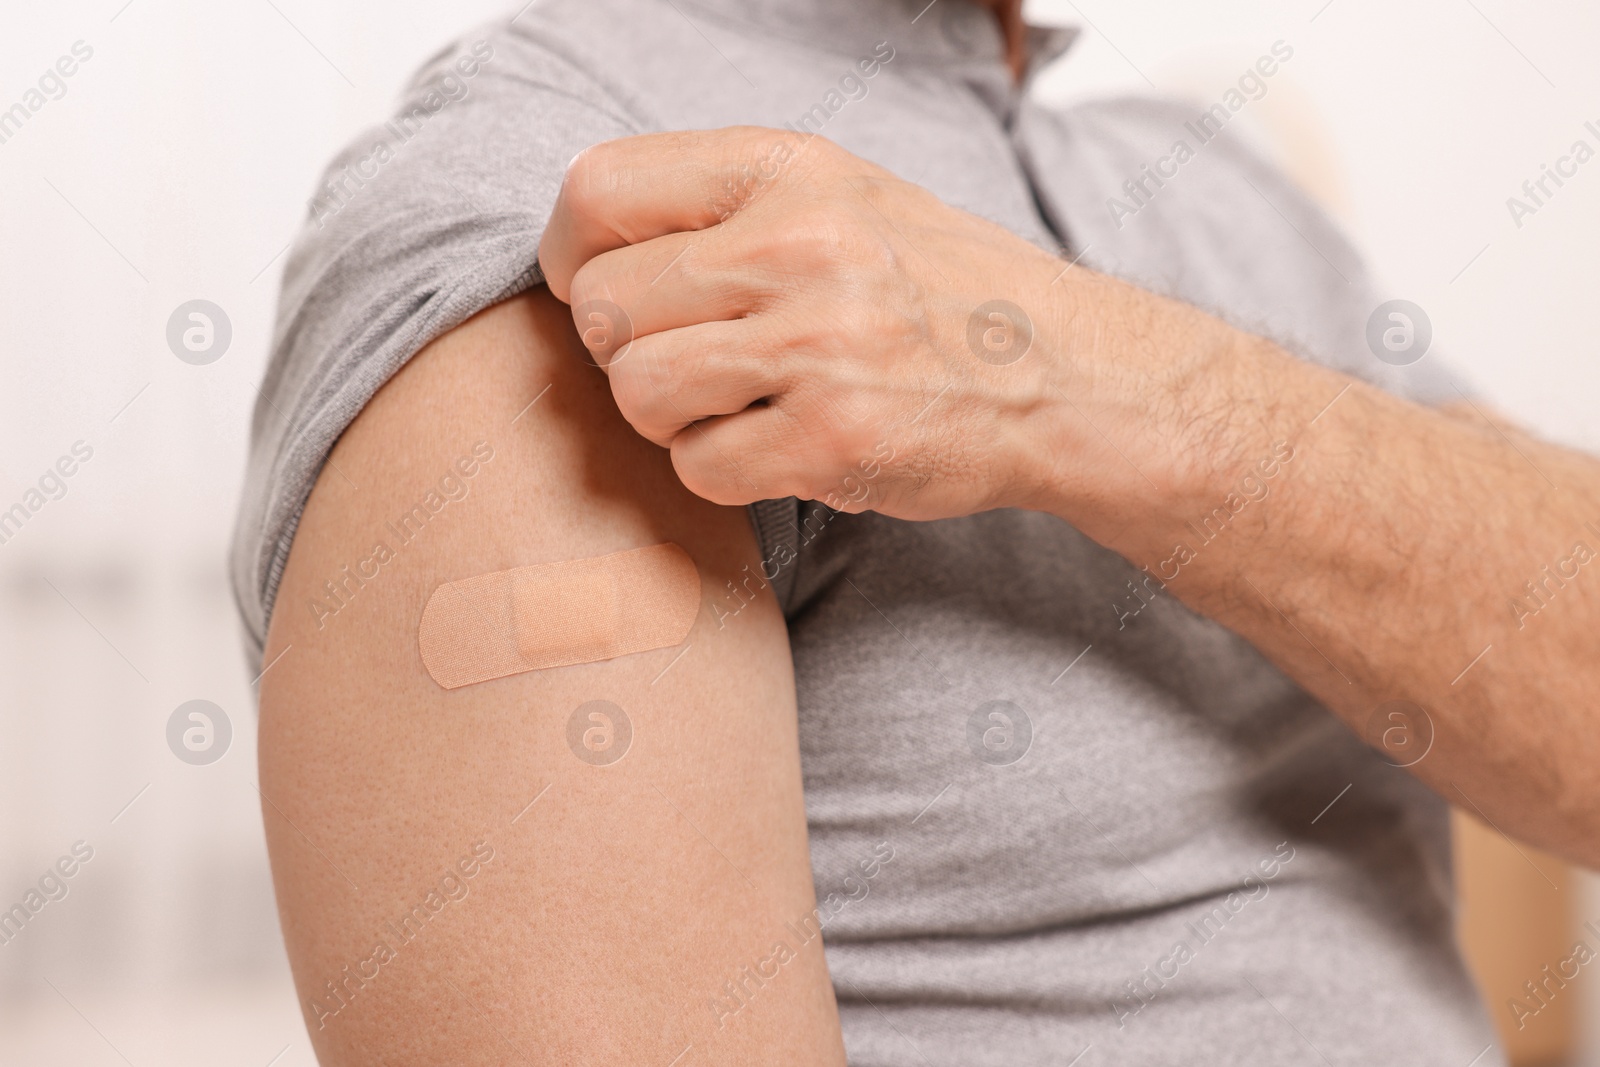 Photo of Man with adhesive bandage on his arm after vaccination against blurred background, closeup